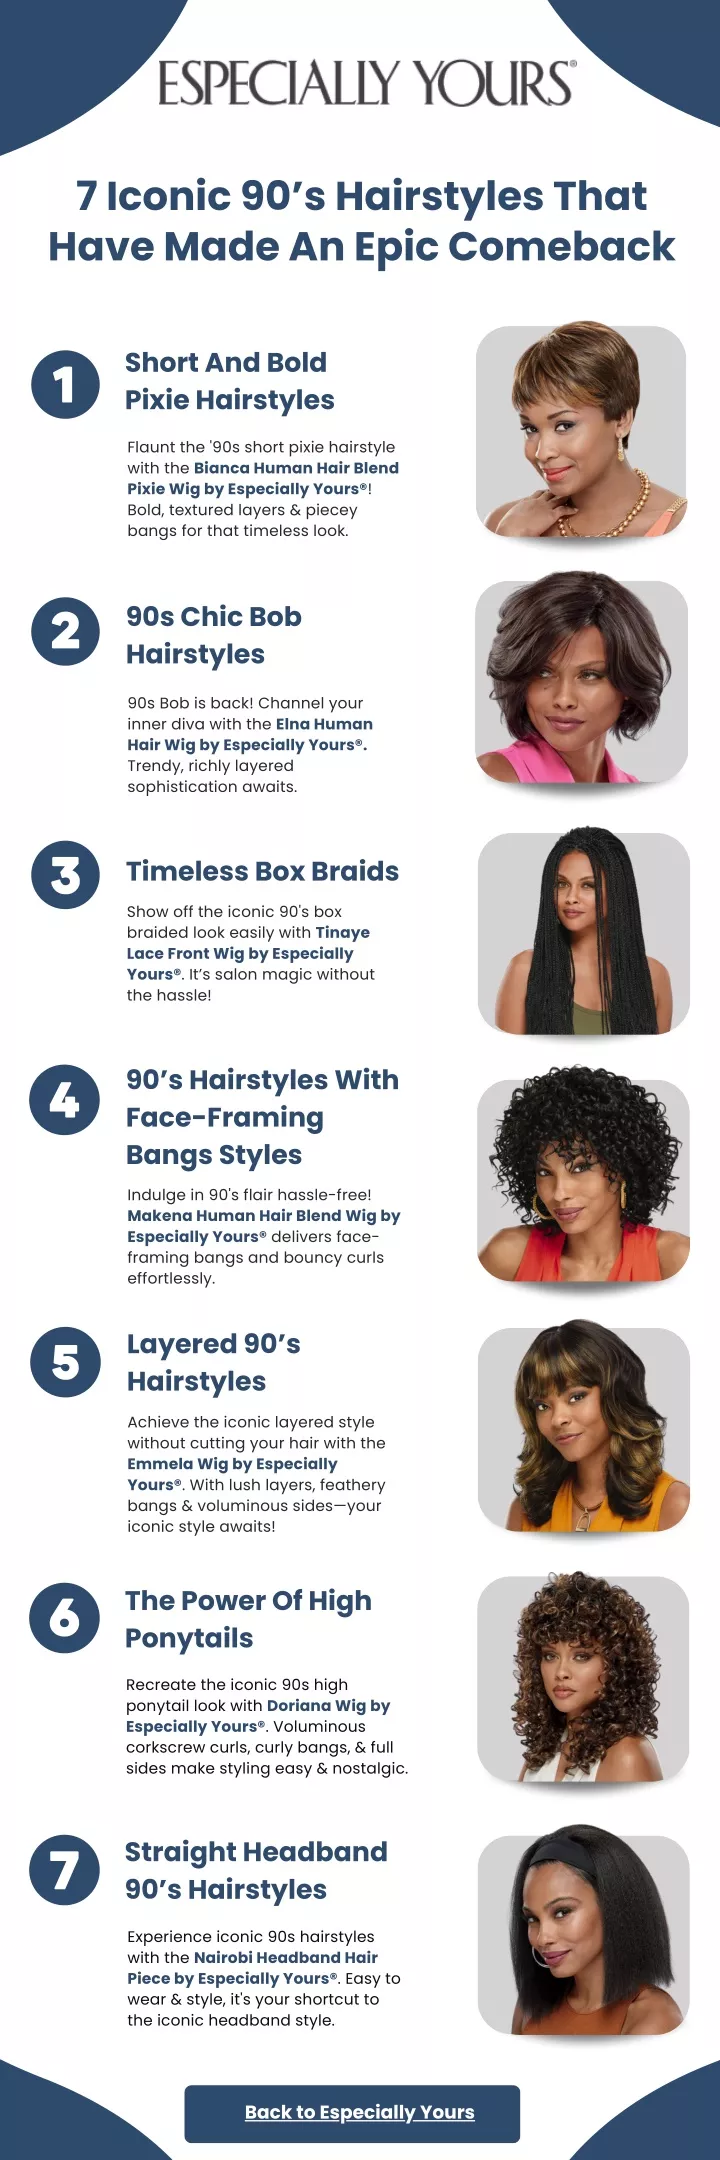 7 iconic 90 s hairstyles that have made an epic